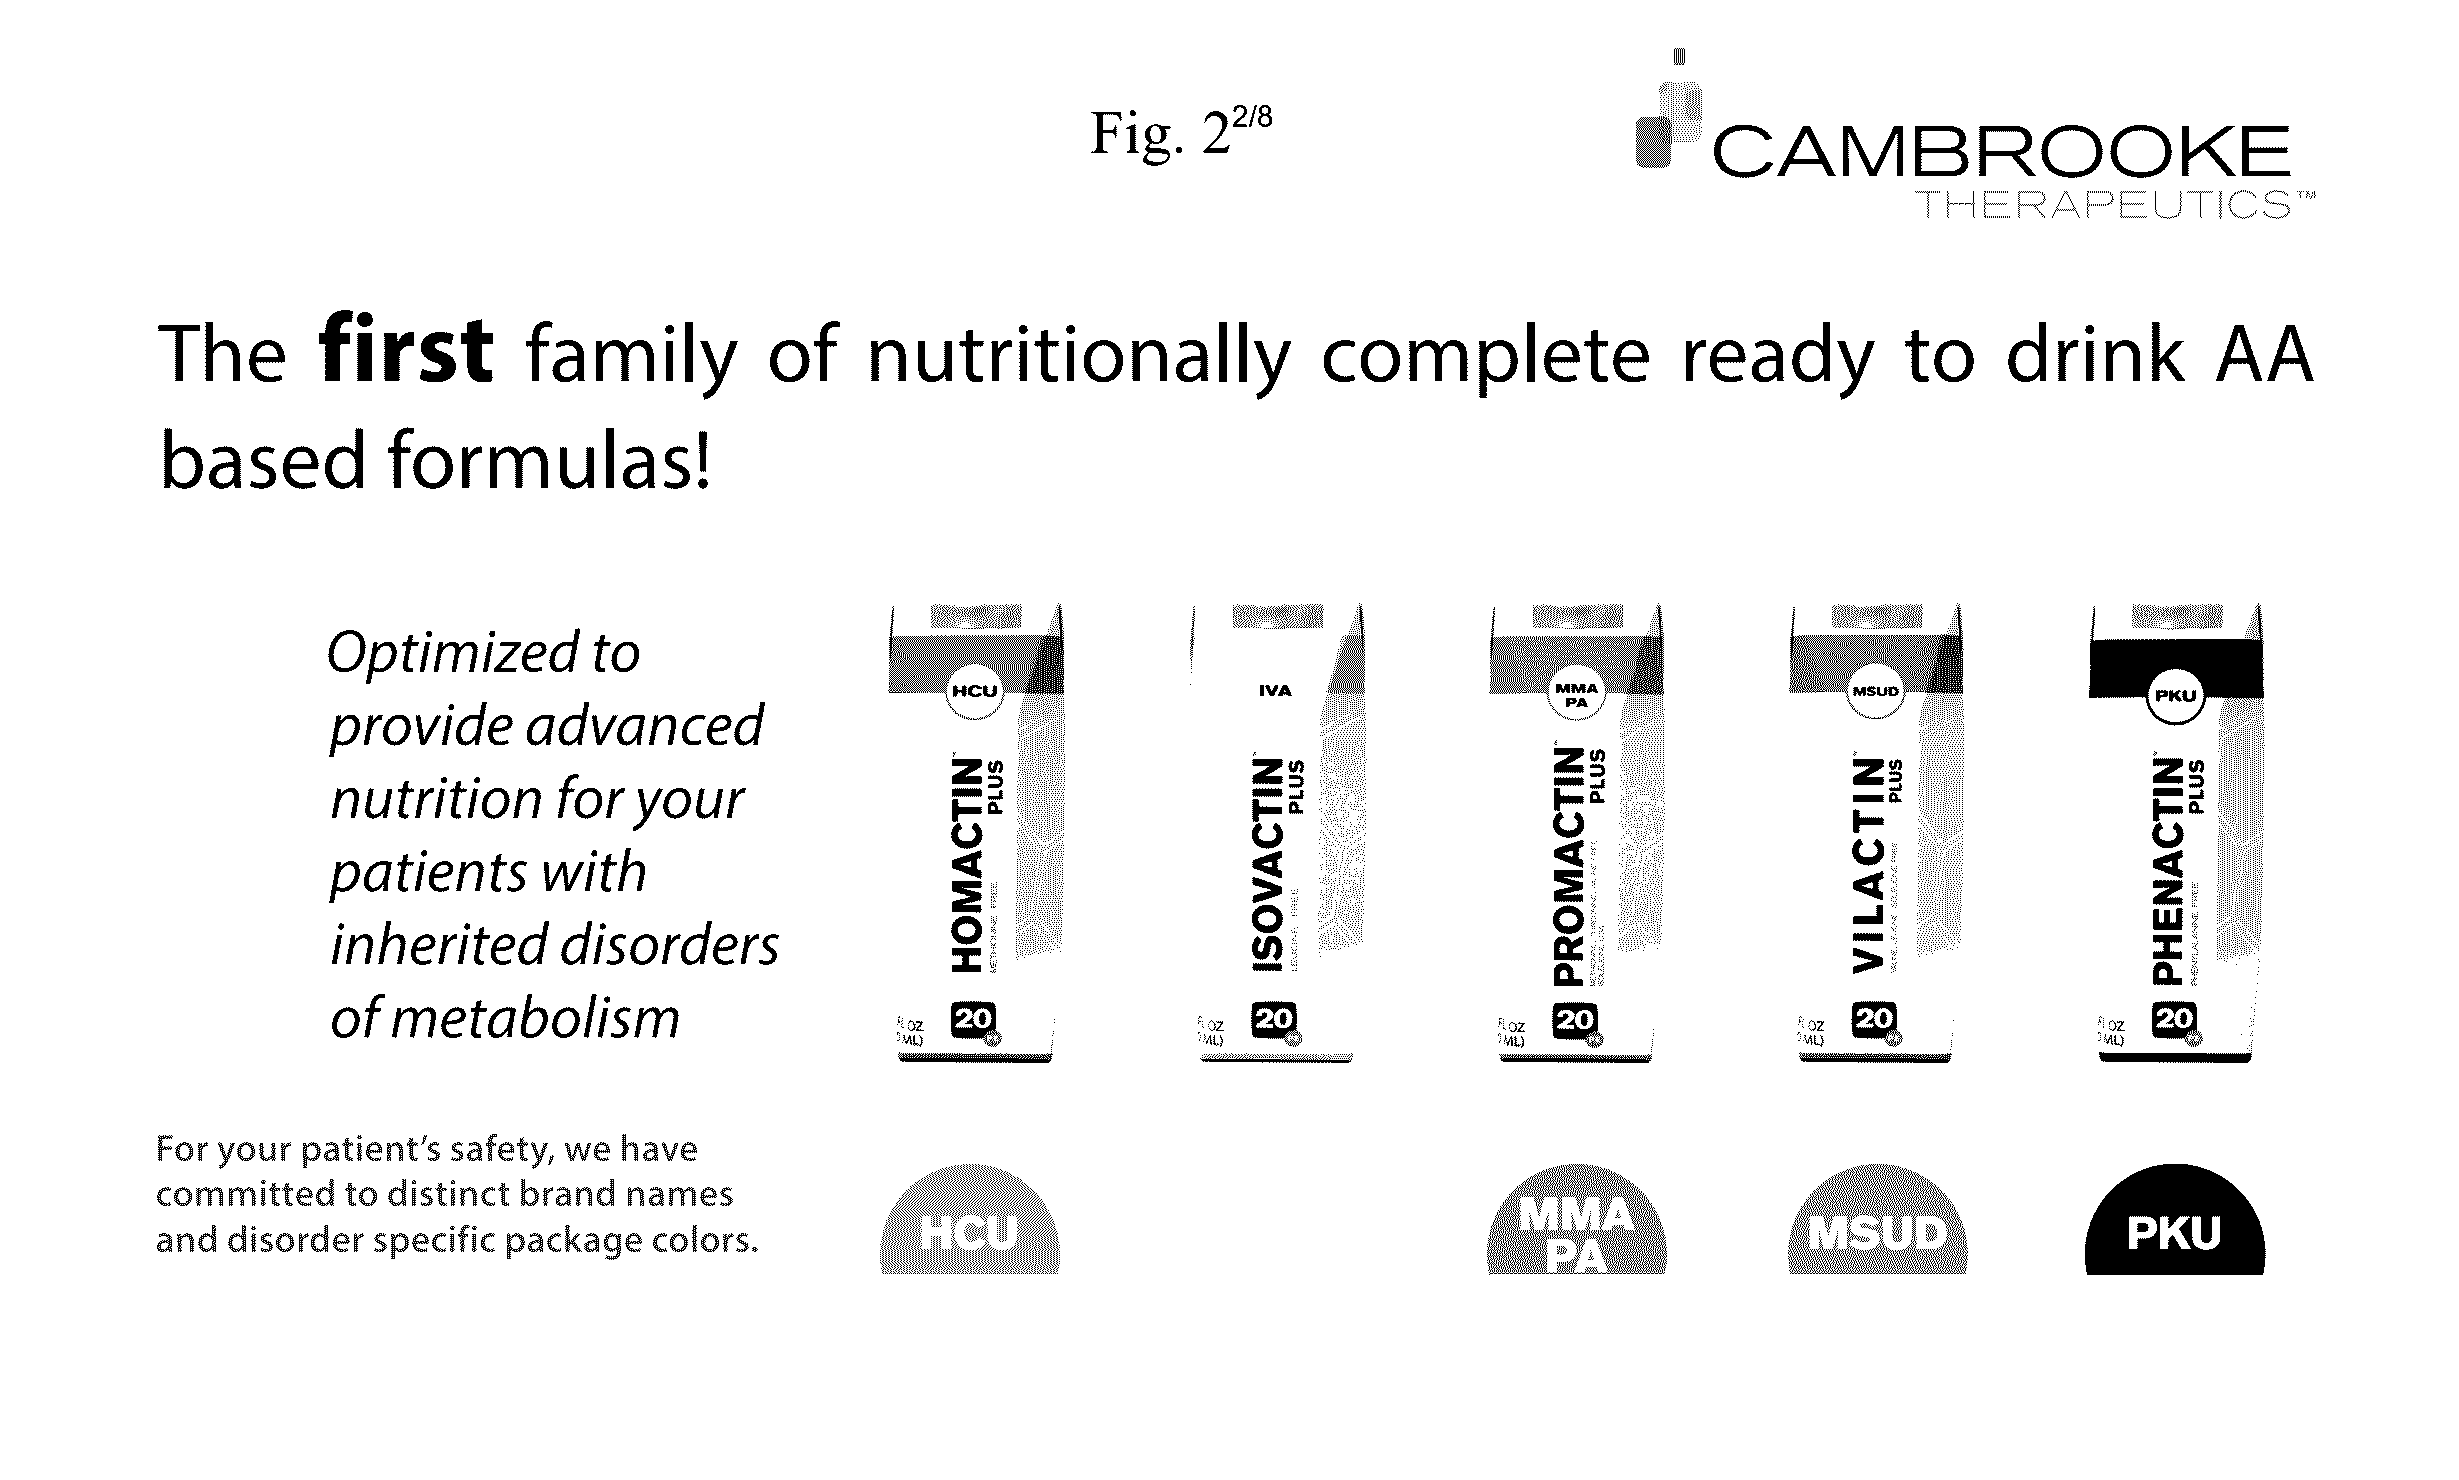 Nutritional compositions